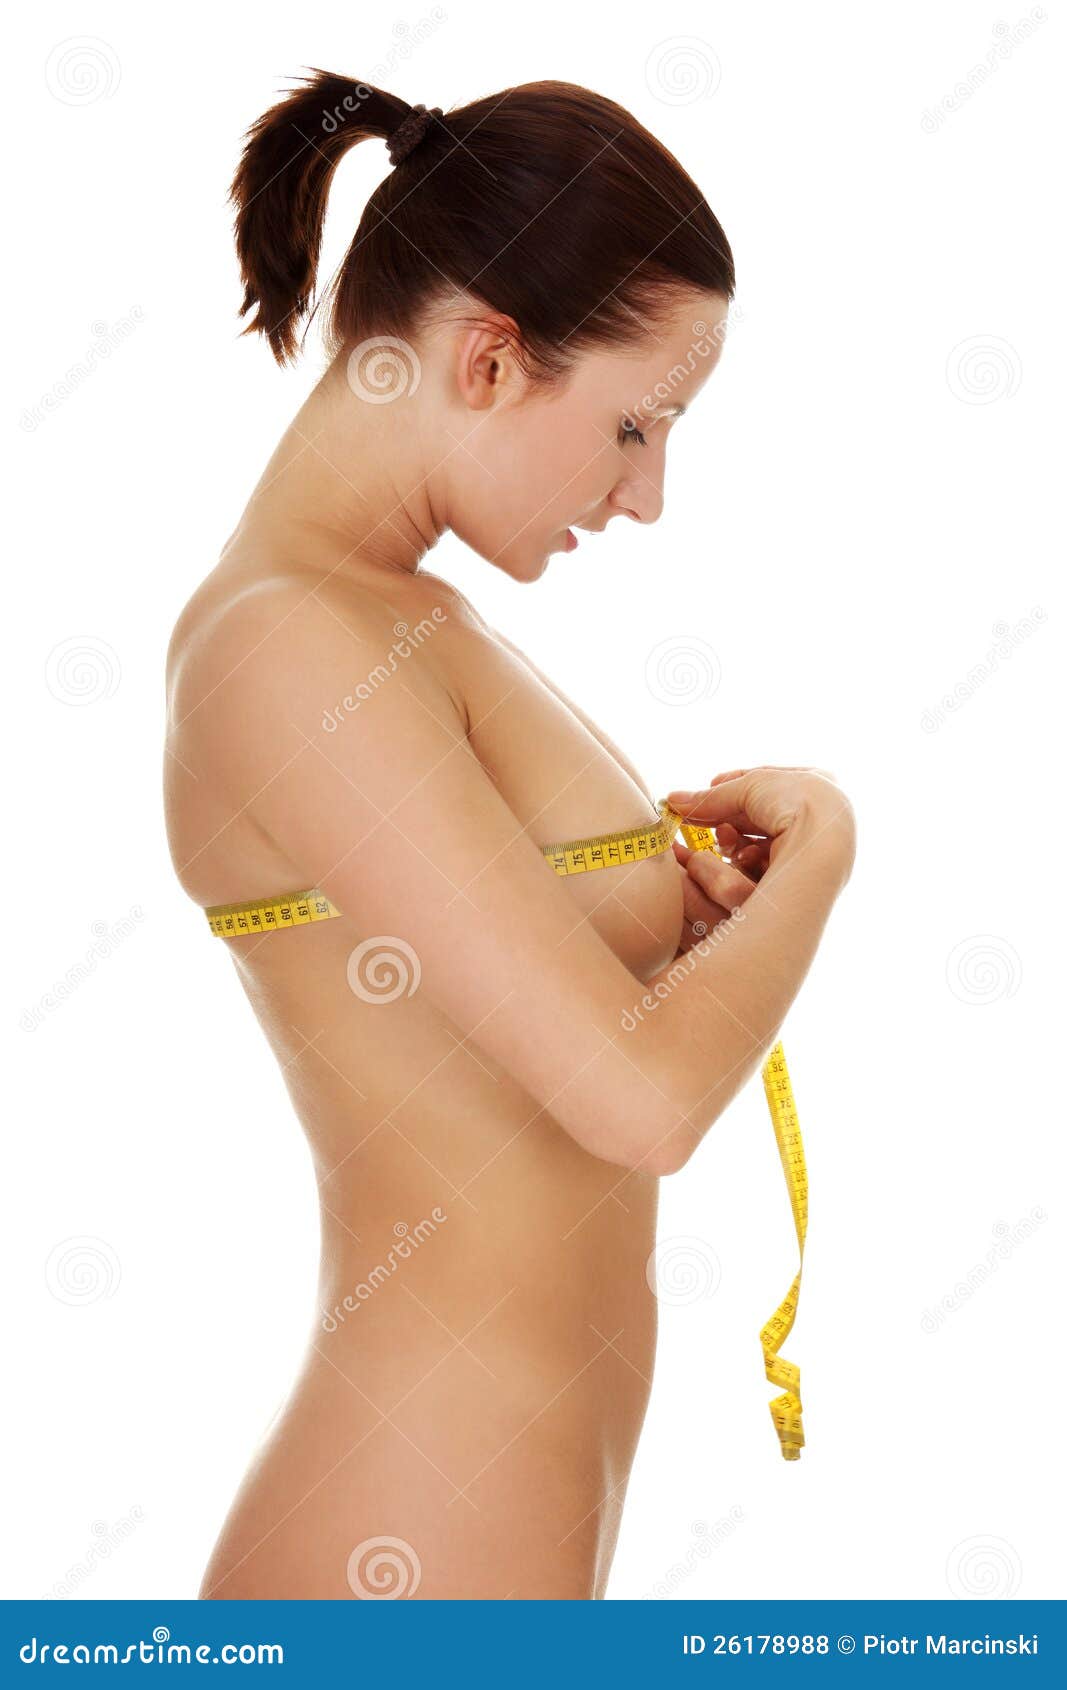 Naked Young Woman Measuring Her Breast. Stock Photo - Image of